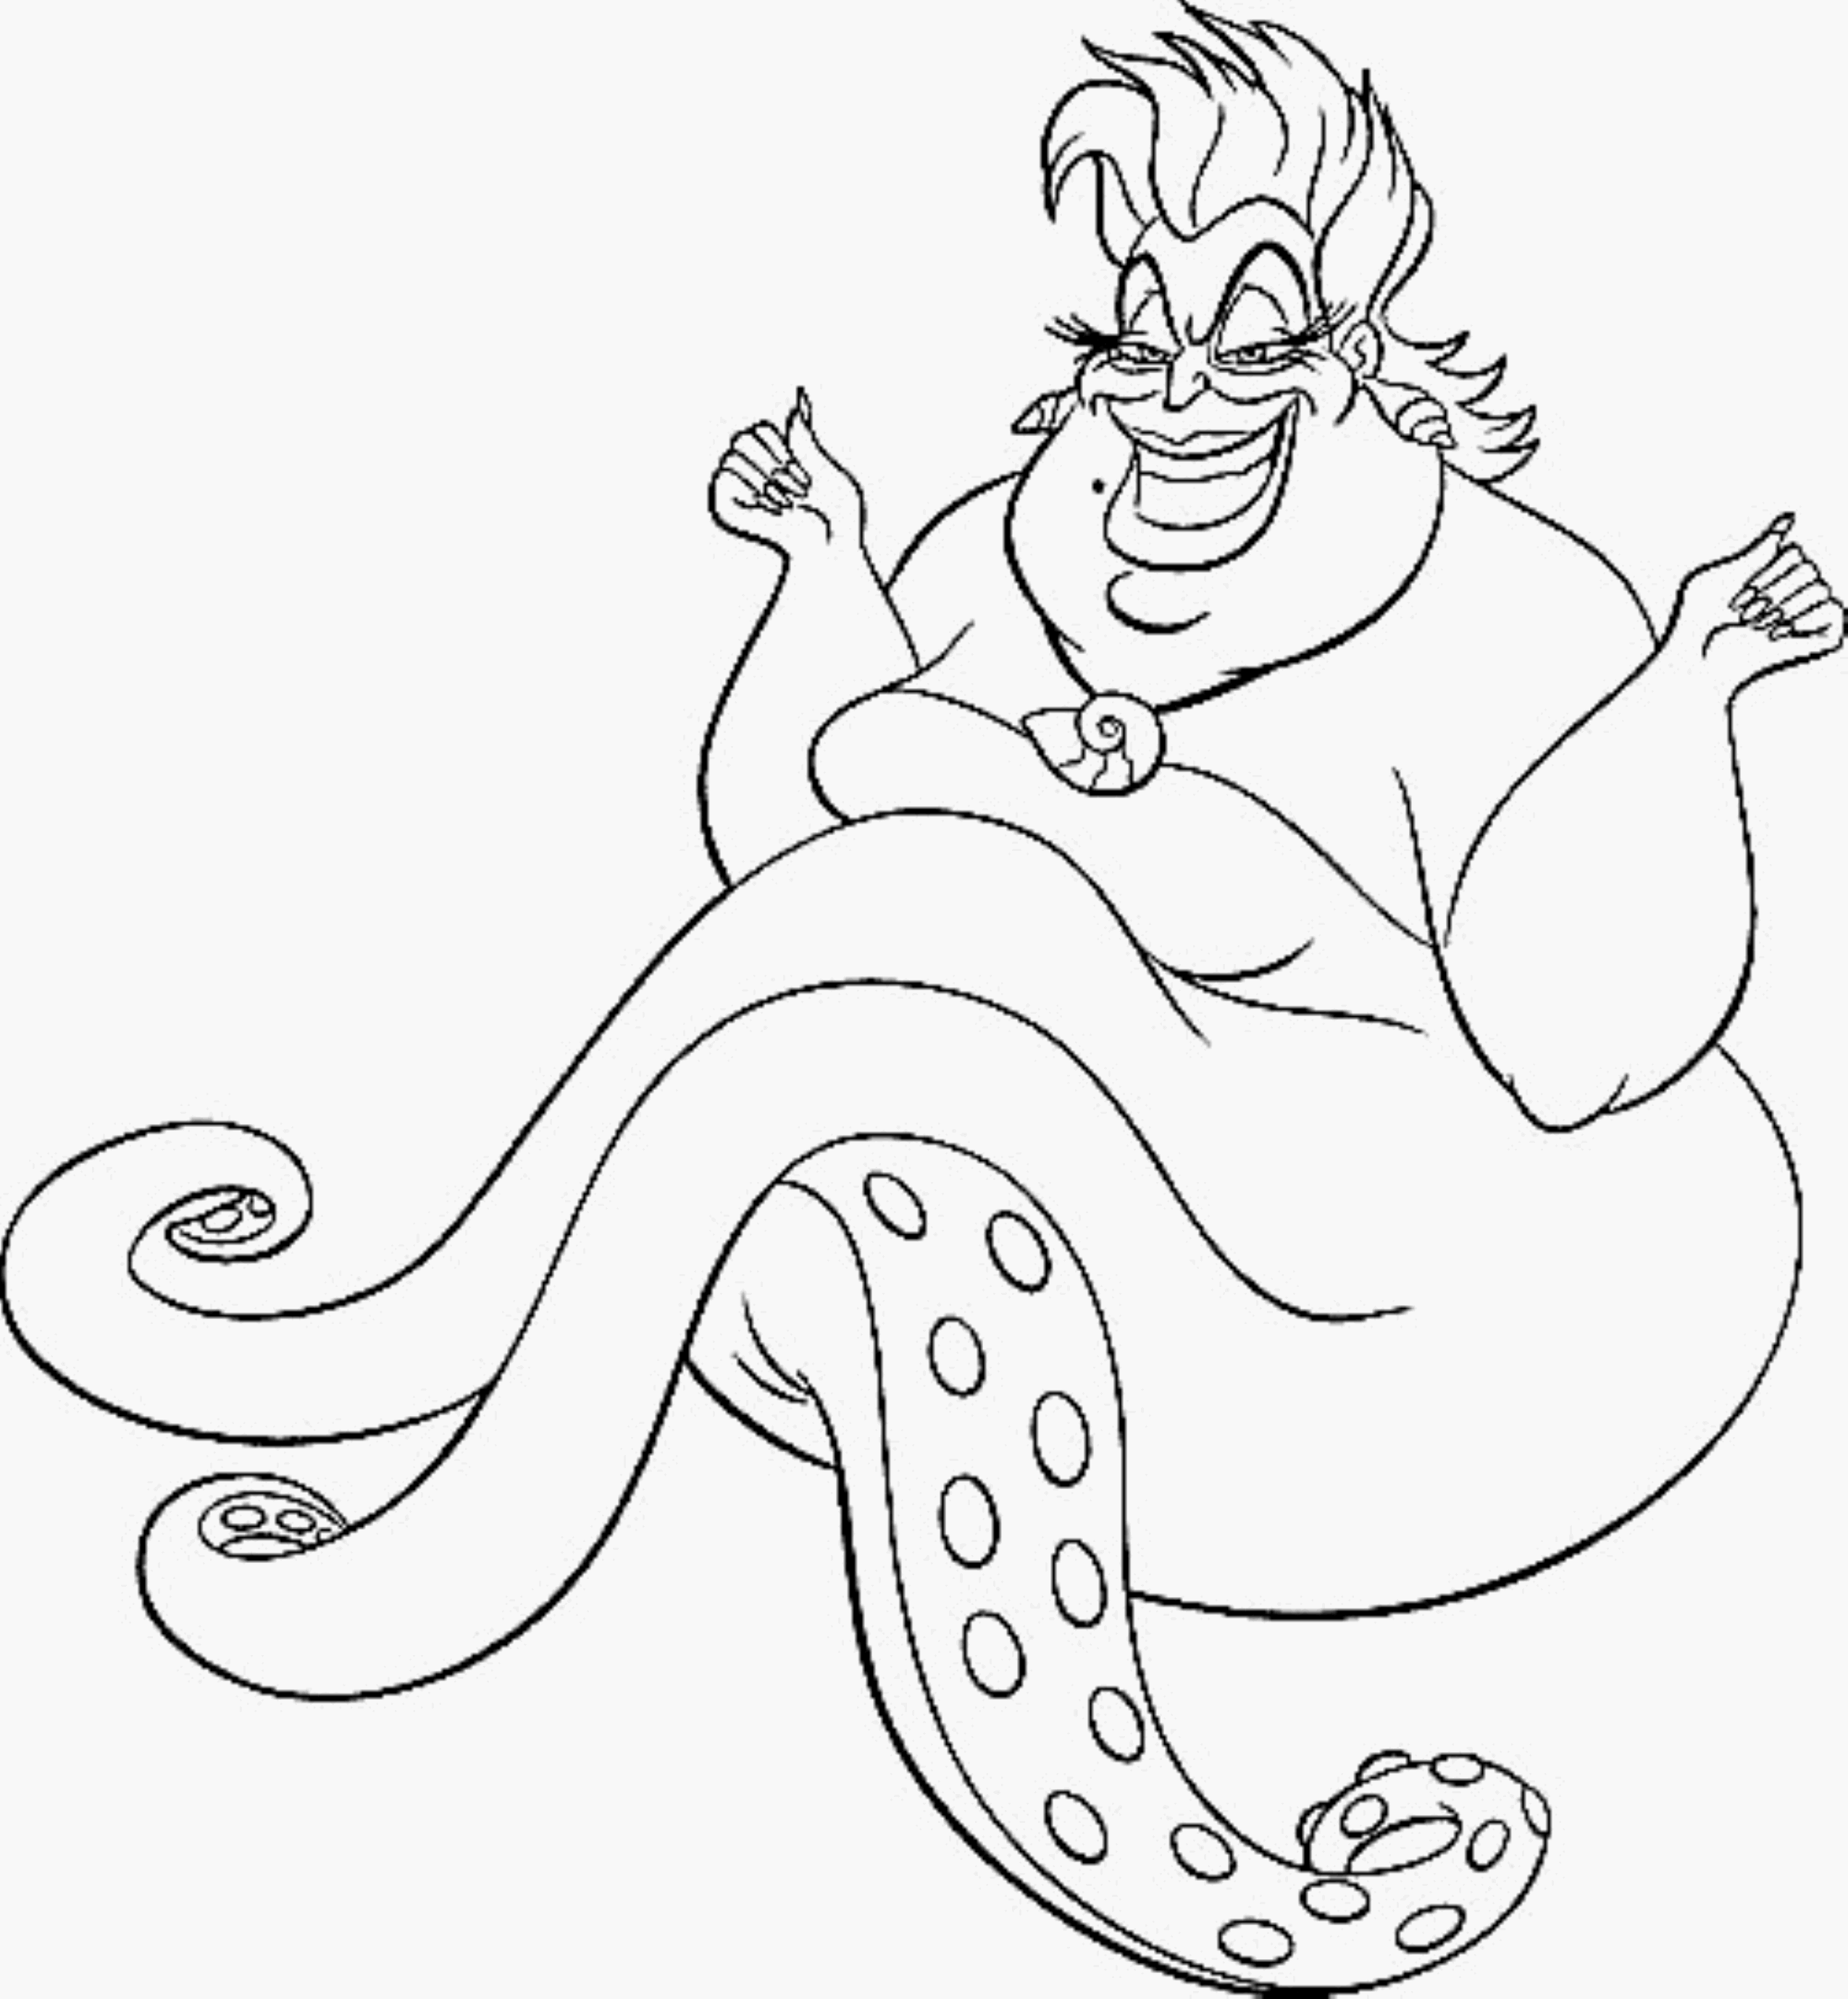 ursula-from-the-little-mermaid-coloring-pages-printable-kids-coloring-home